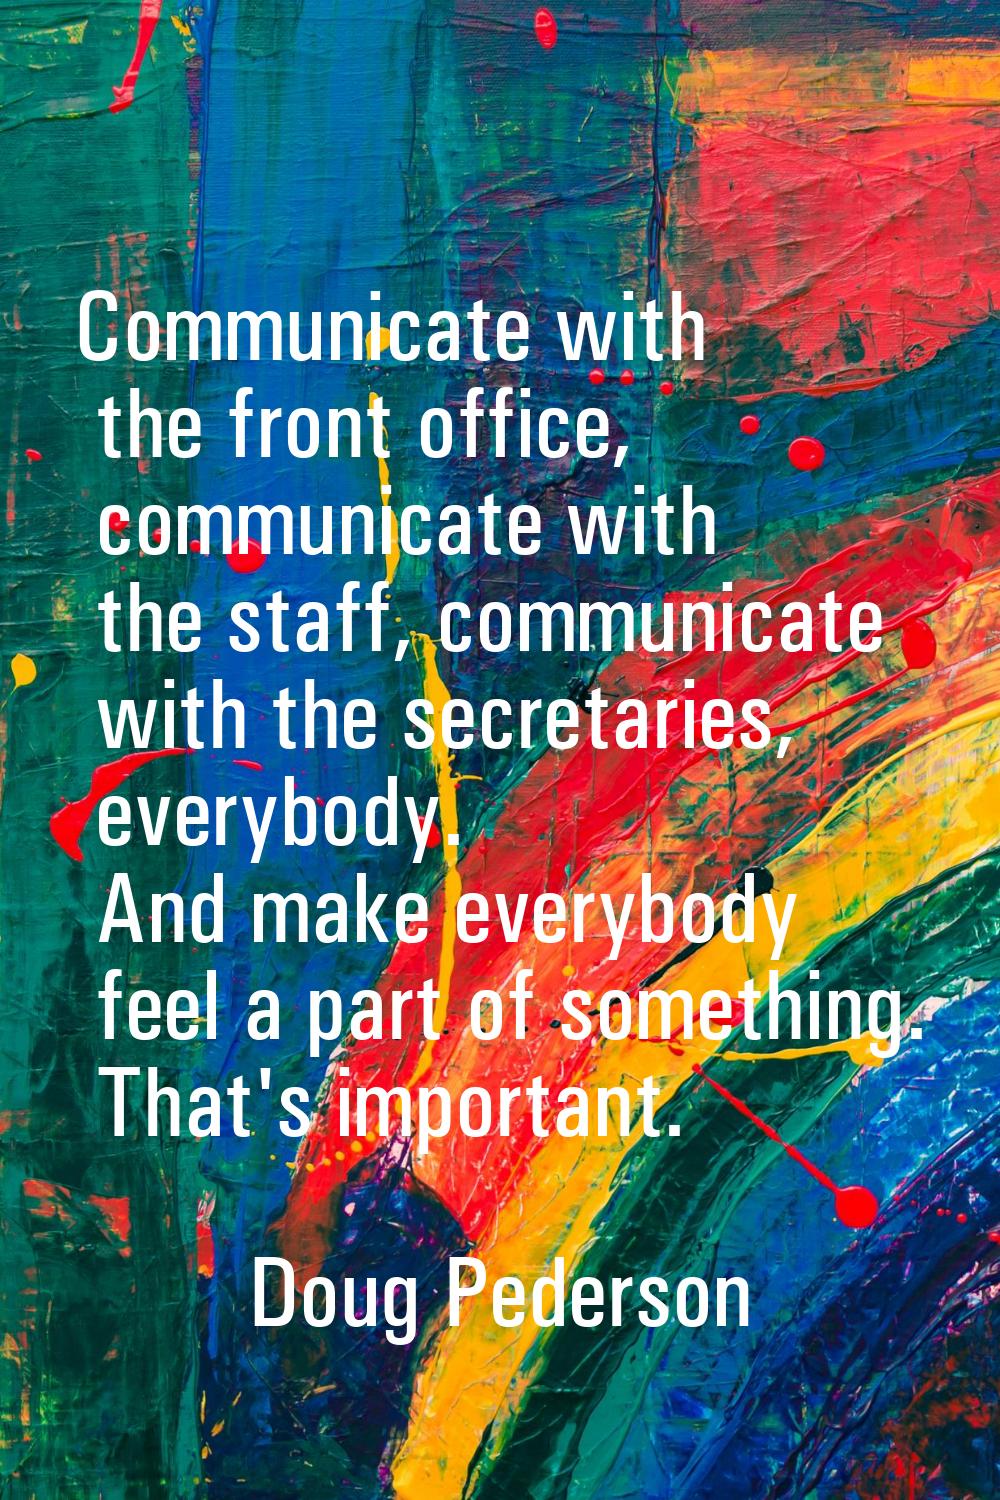 Communicate with the front office, communicate with the staff, communicate with the secretaries, ev